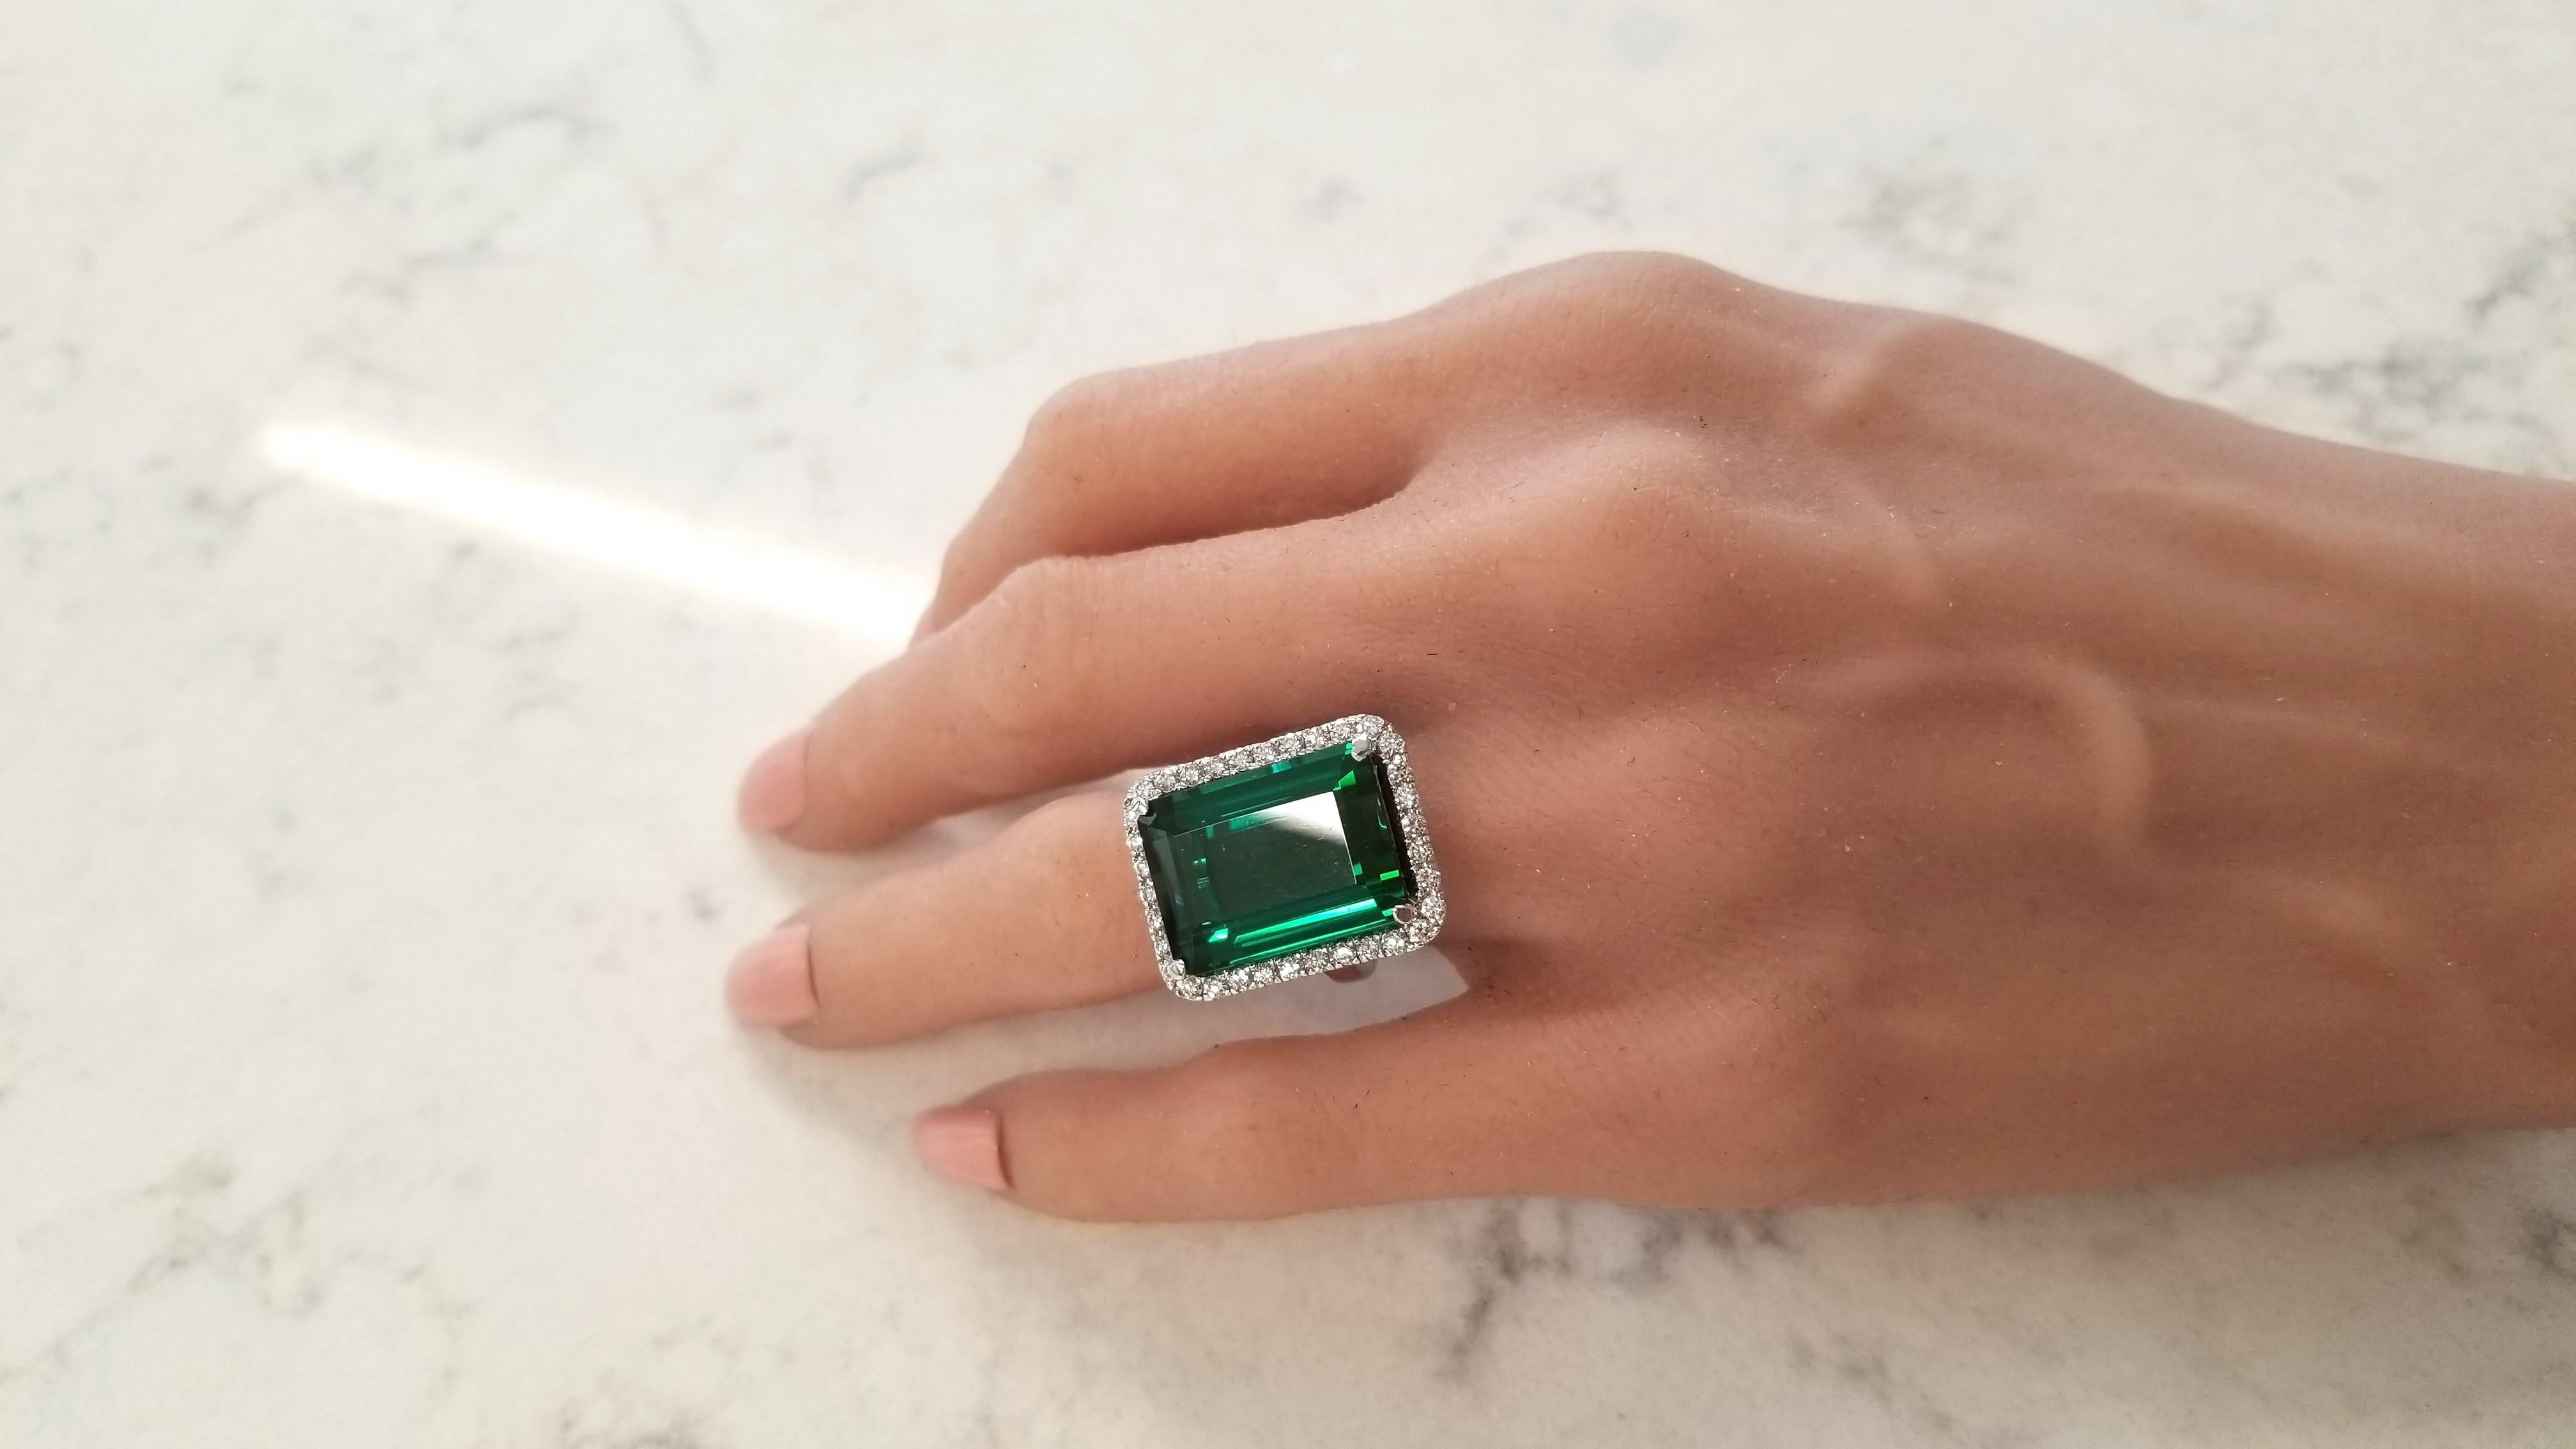 This is a 16.30 carat emerald-cut, lush grass green, tourmaline measuring 13 x 9mm. Its gem source is Brazil. This gem's main exhibit is its clean, crisp spring forest green hue. Its transparency and luster are superb. A total of 34 scintillating